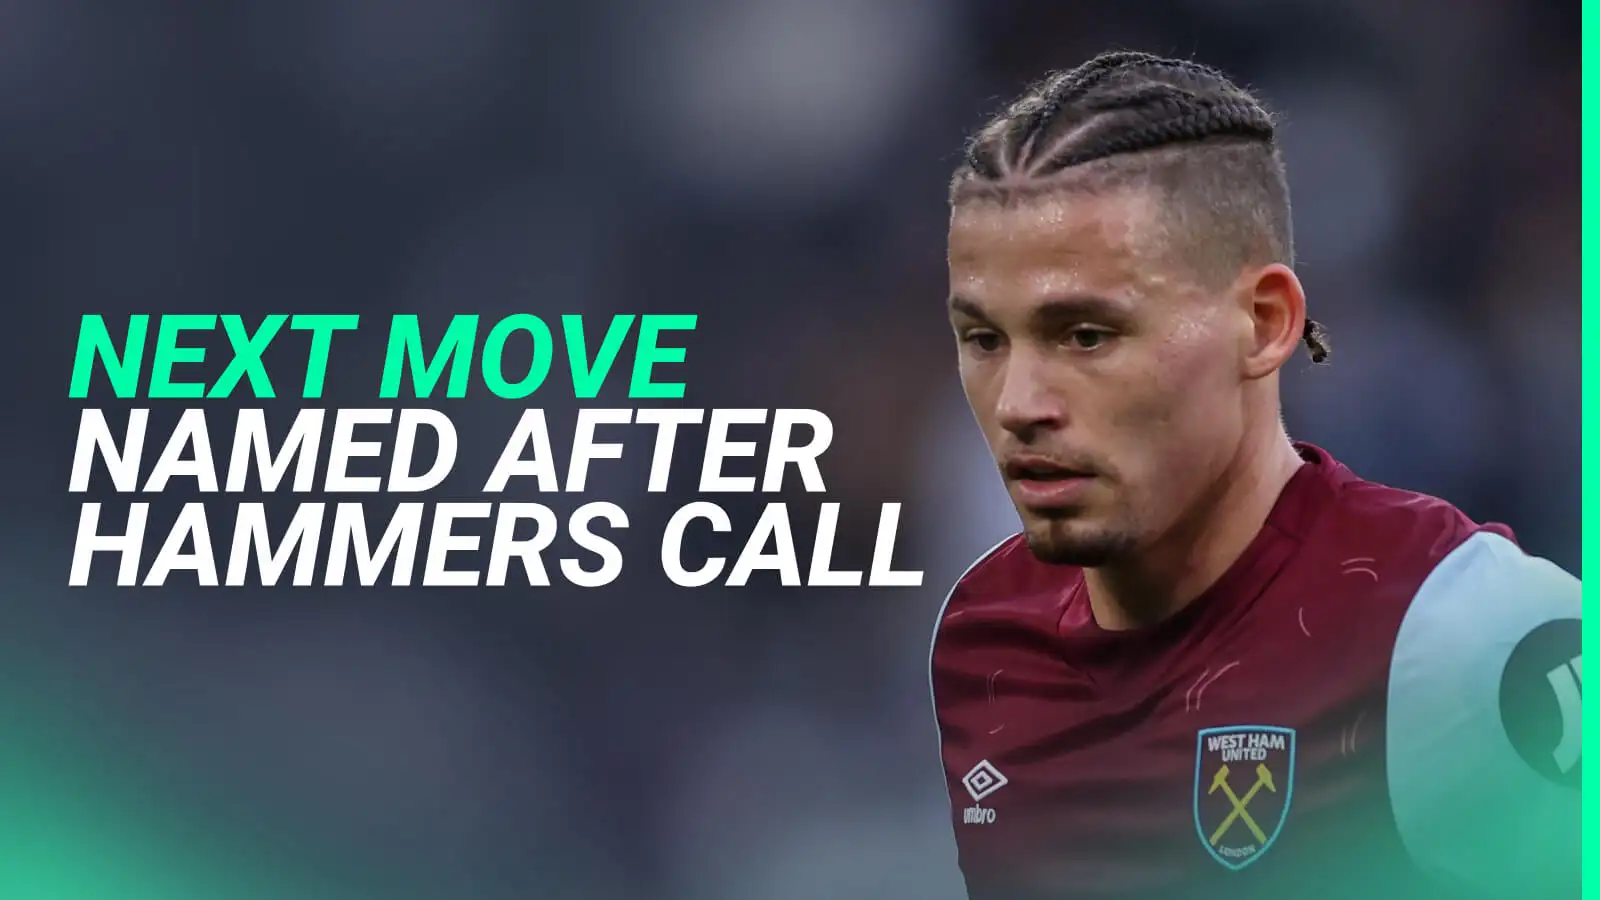 Game over for Kalvin Phillips at West Ham, as talk of incredible Leeds Utd return heats up